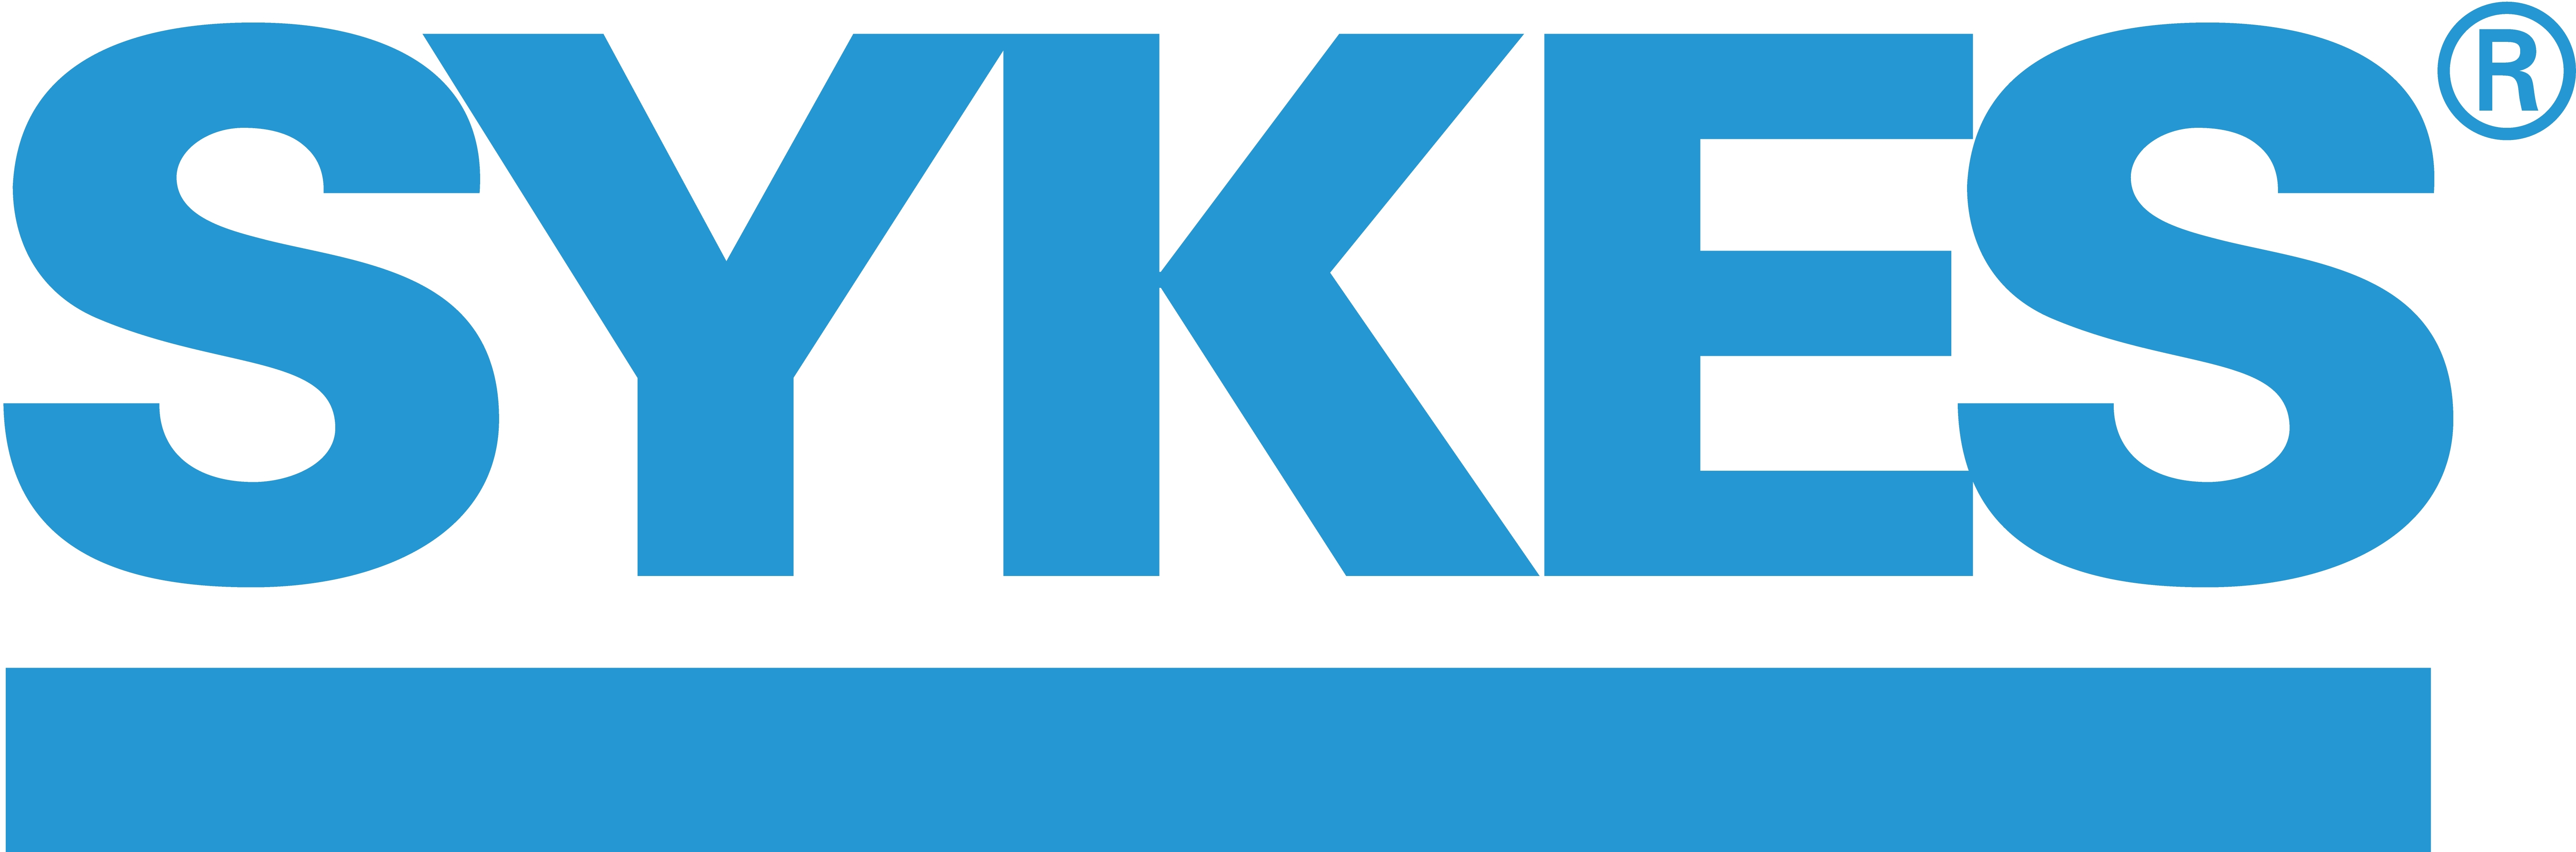 SYKES Announces Launch of SYKES Digital Services Division | Business Wire